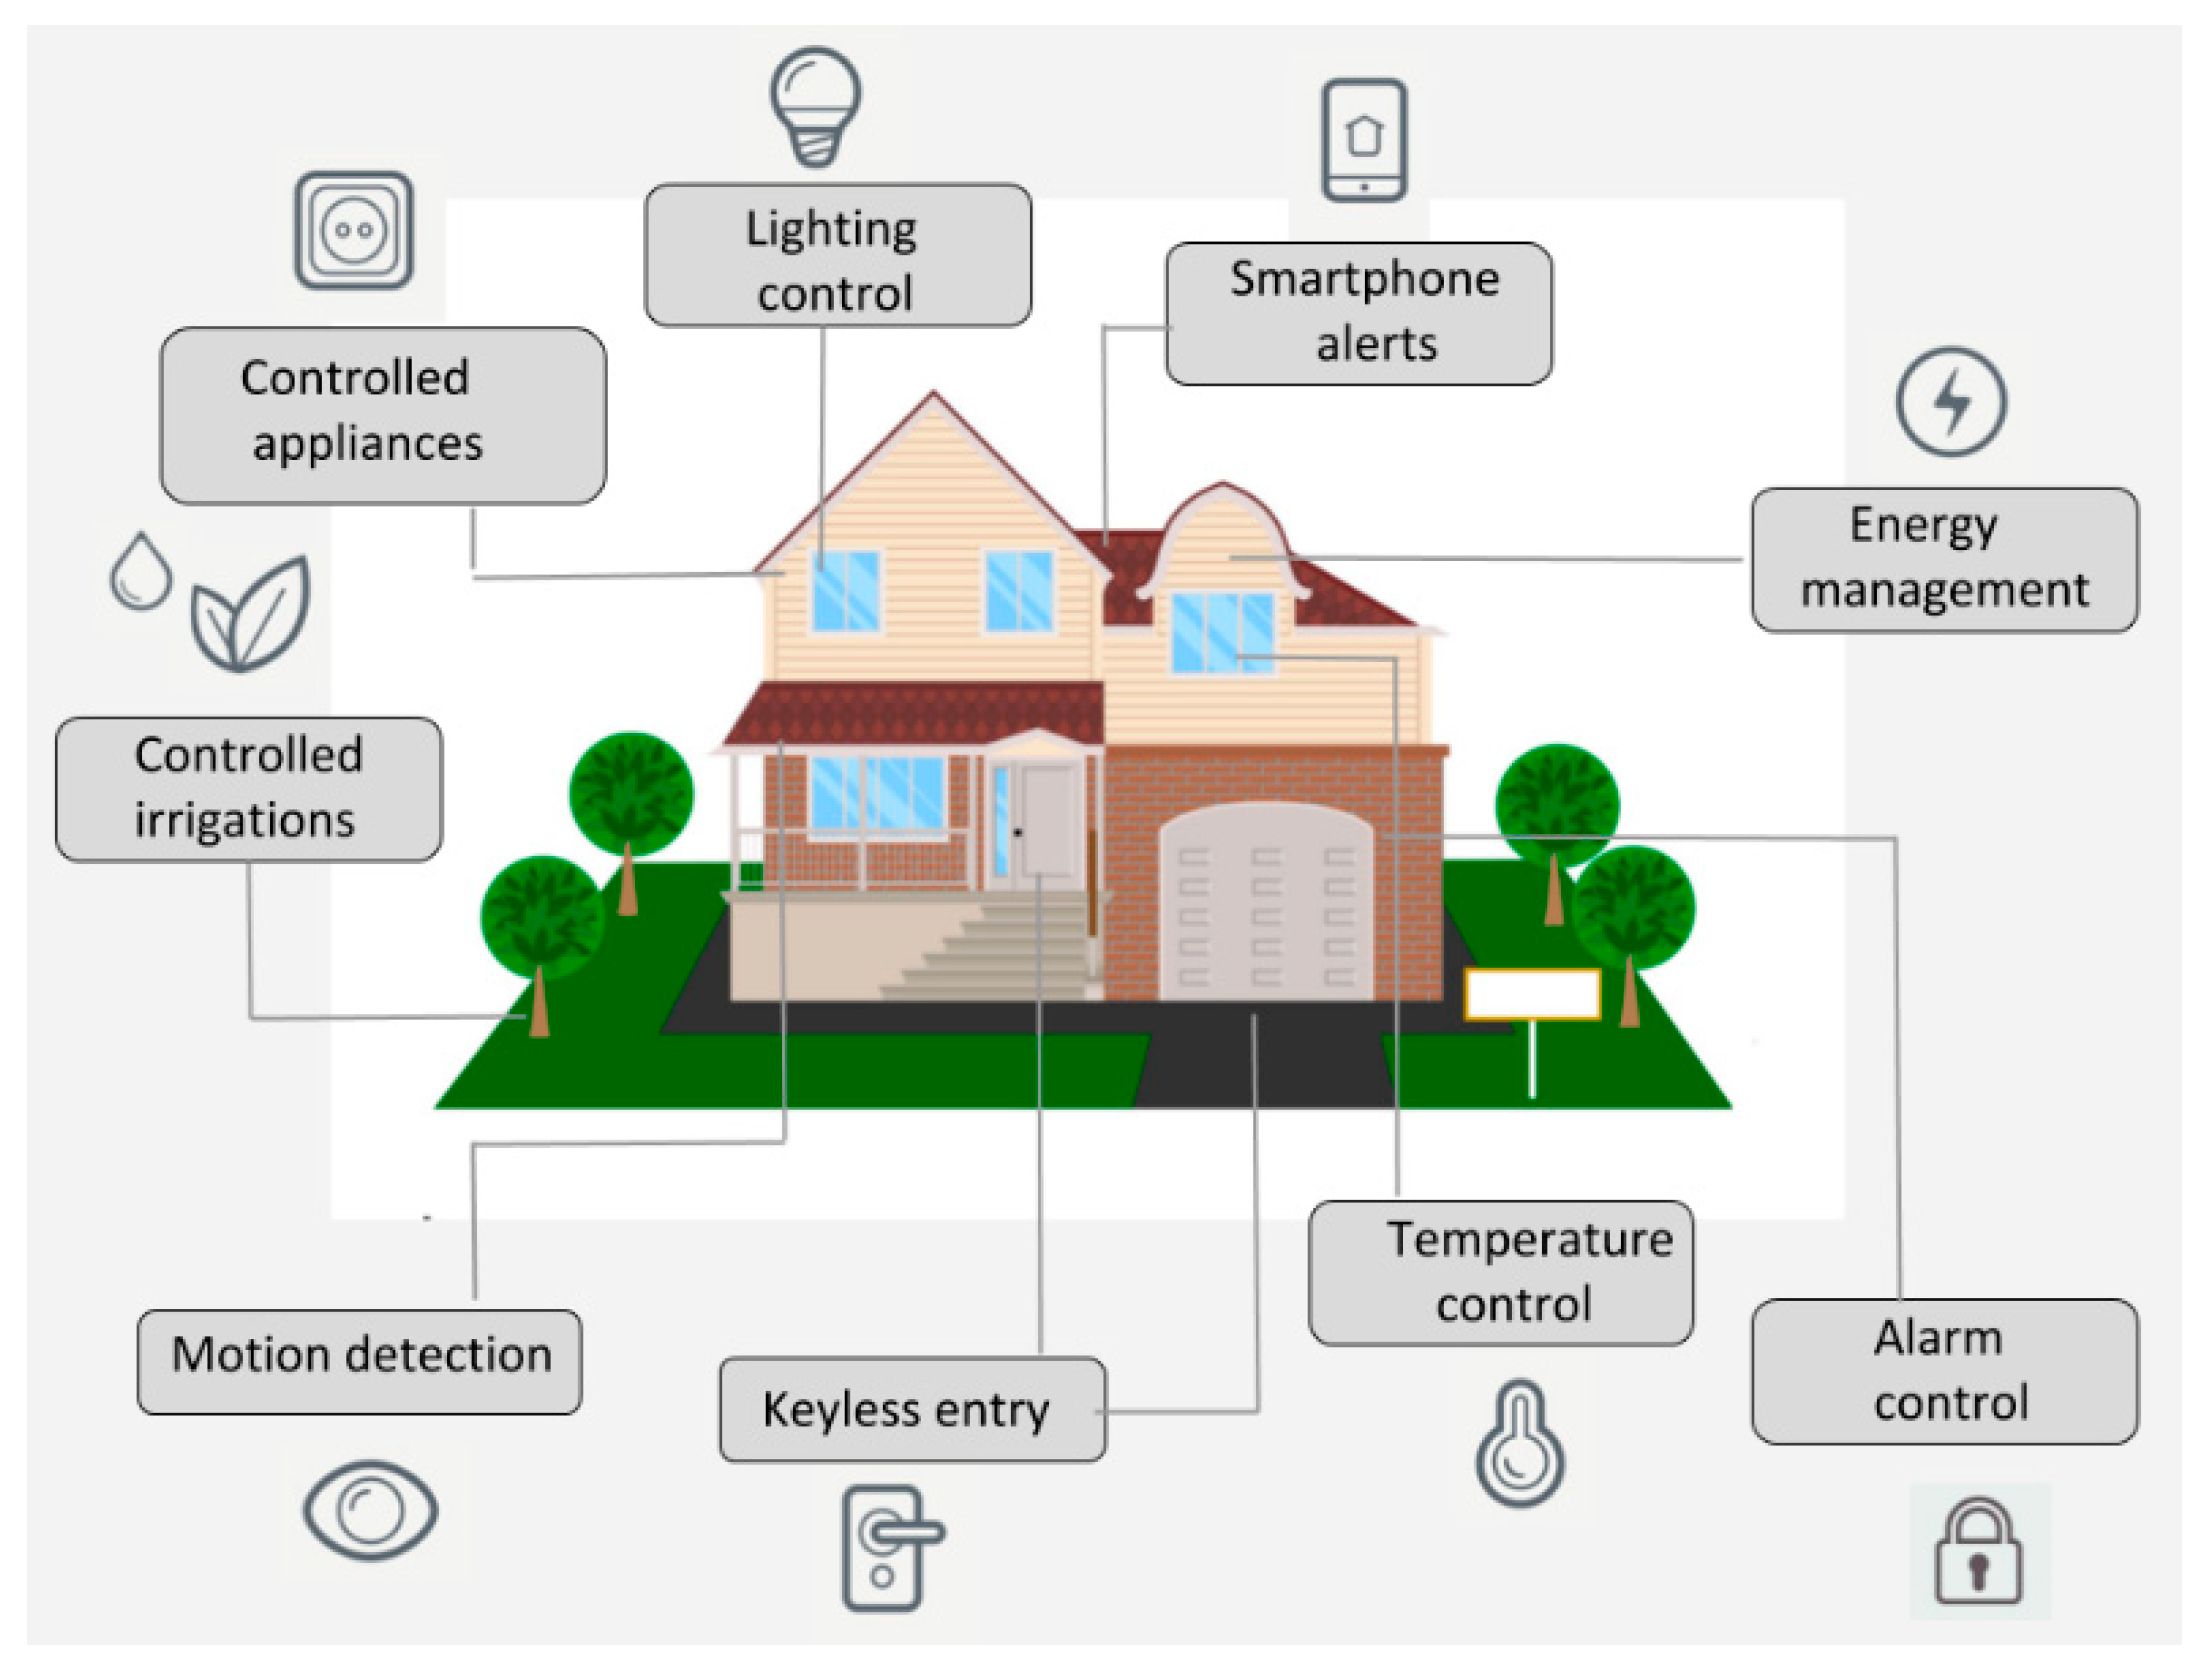 What Functionality Does An Internet Of Things (IoT) Home Appliance Provide To A Homeowner?